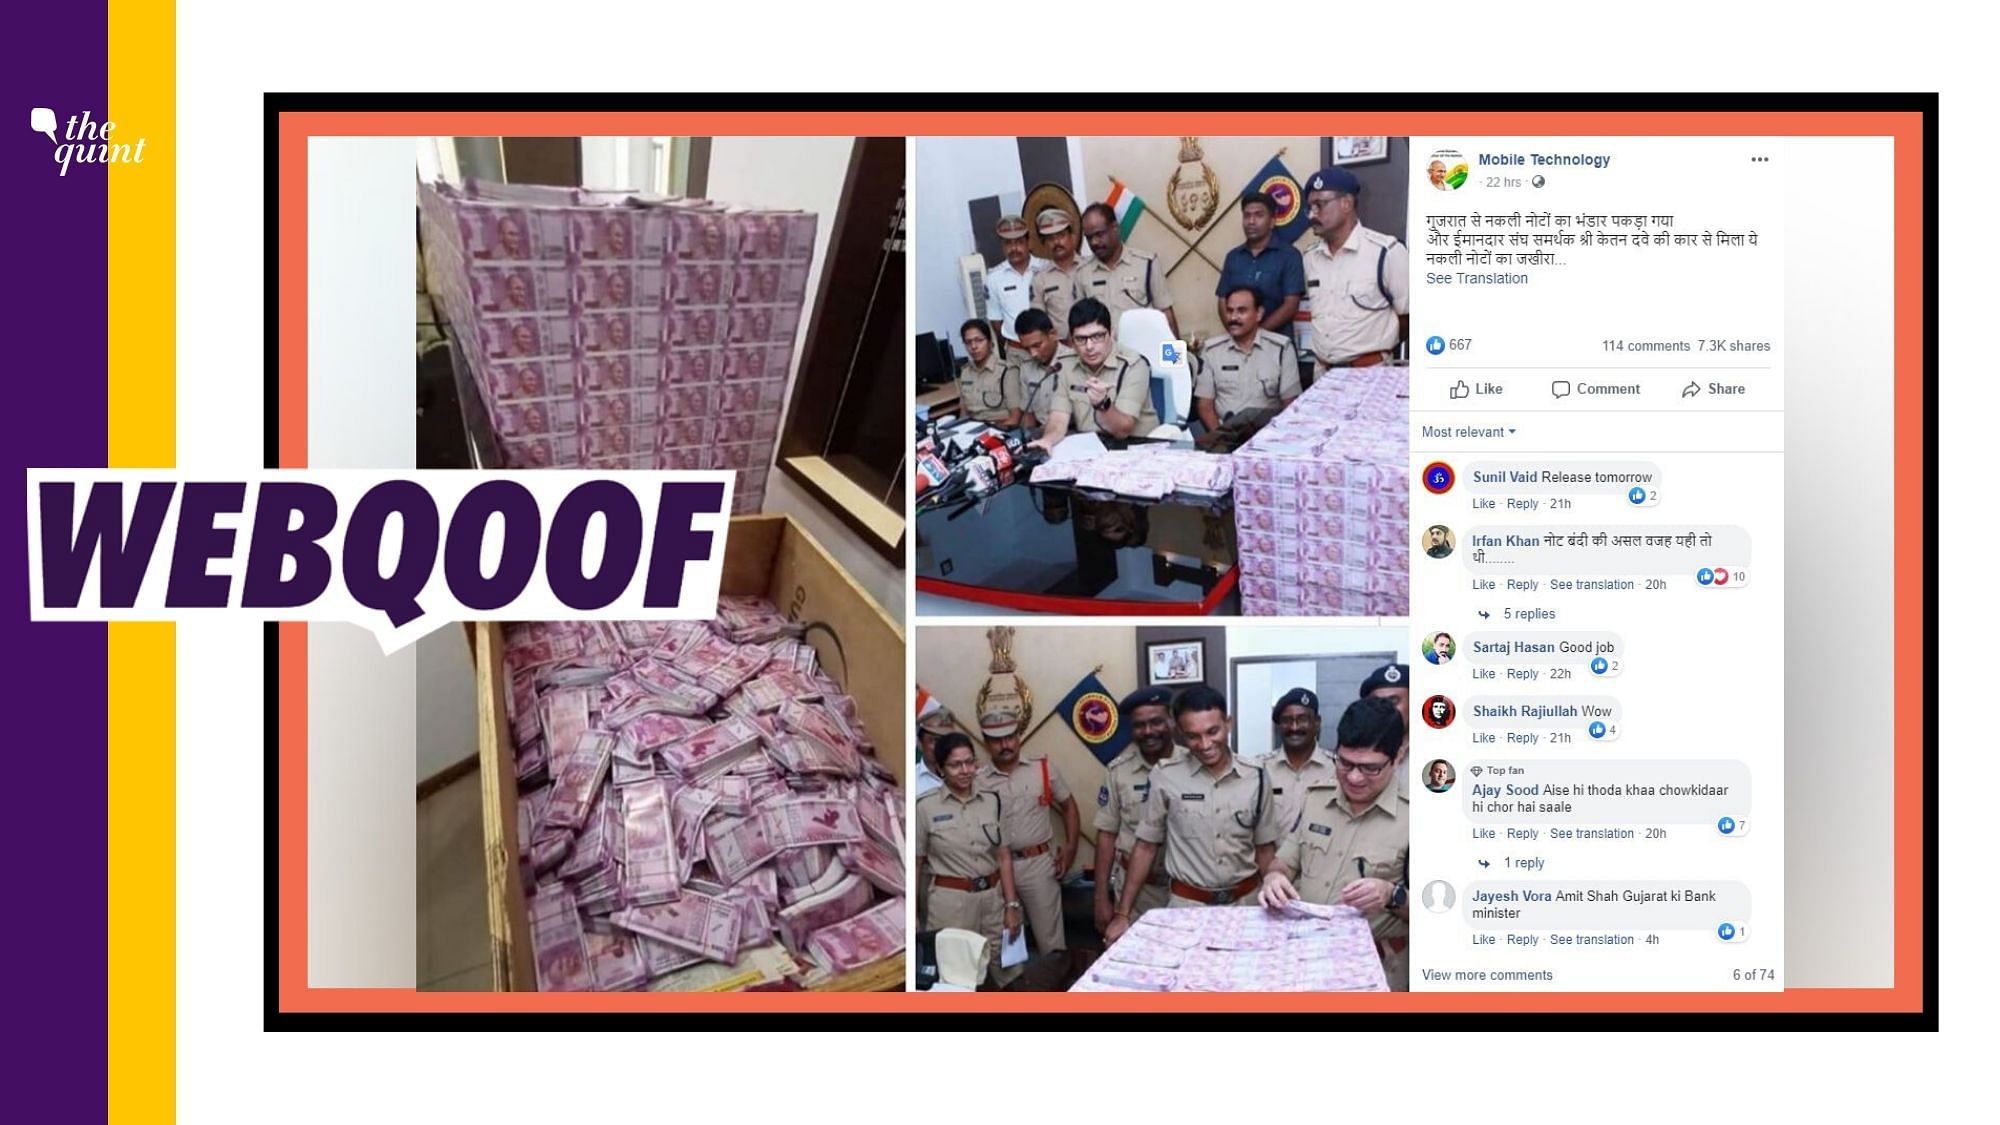 In reality, the images show Telangana Police, who had busted an interstate gang which was involved in circulating fake Rs 2,000 notes.